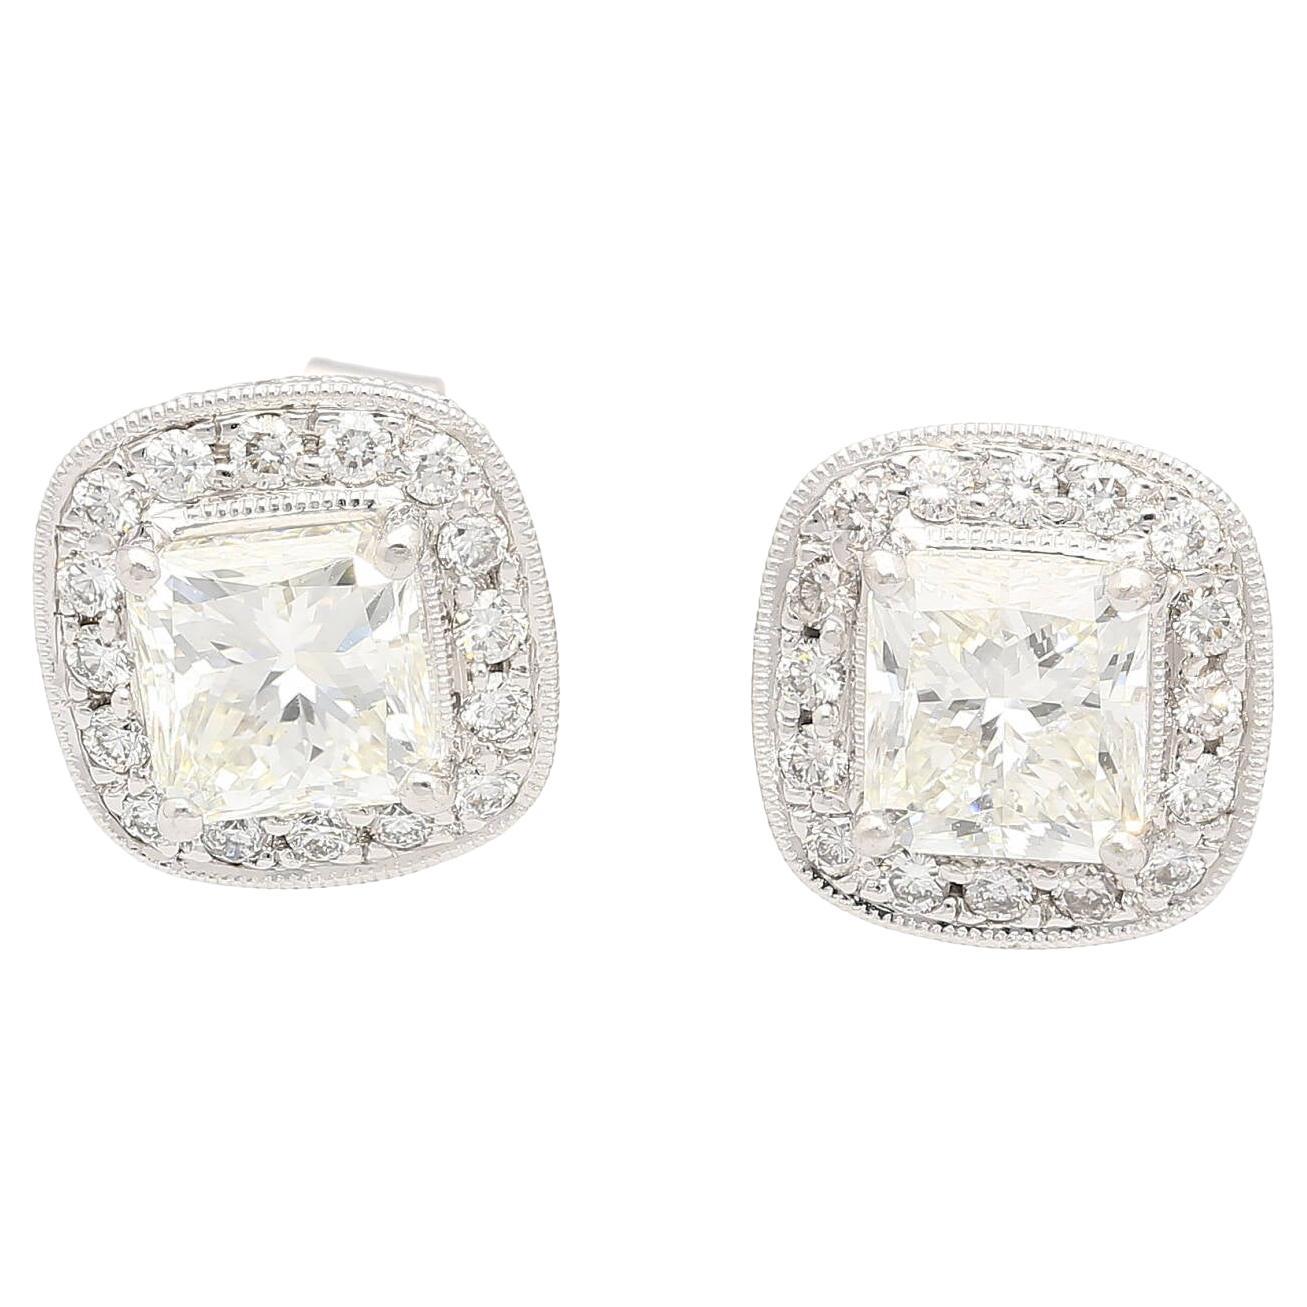 GIA Certified 3 Carat Total Radiant Cut Diamond Stud Earrings in 18k White Gold For Sale